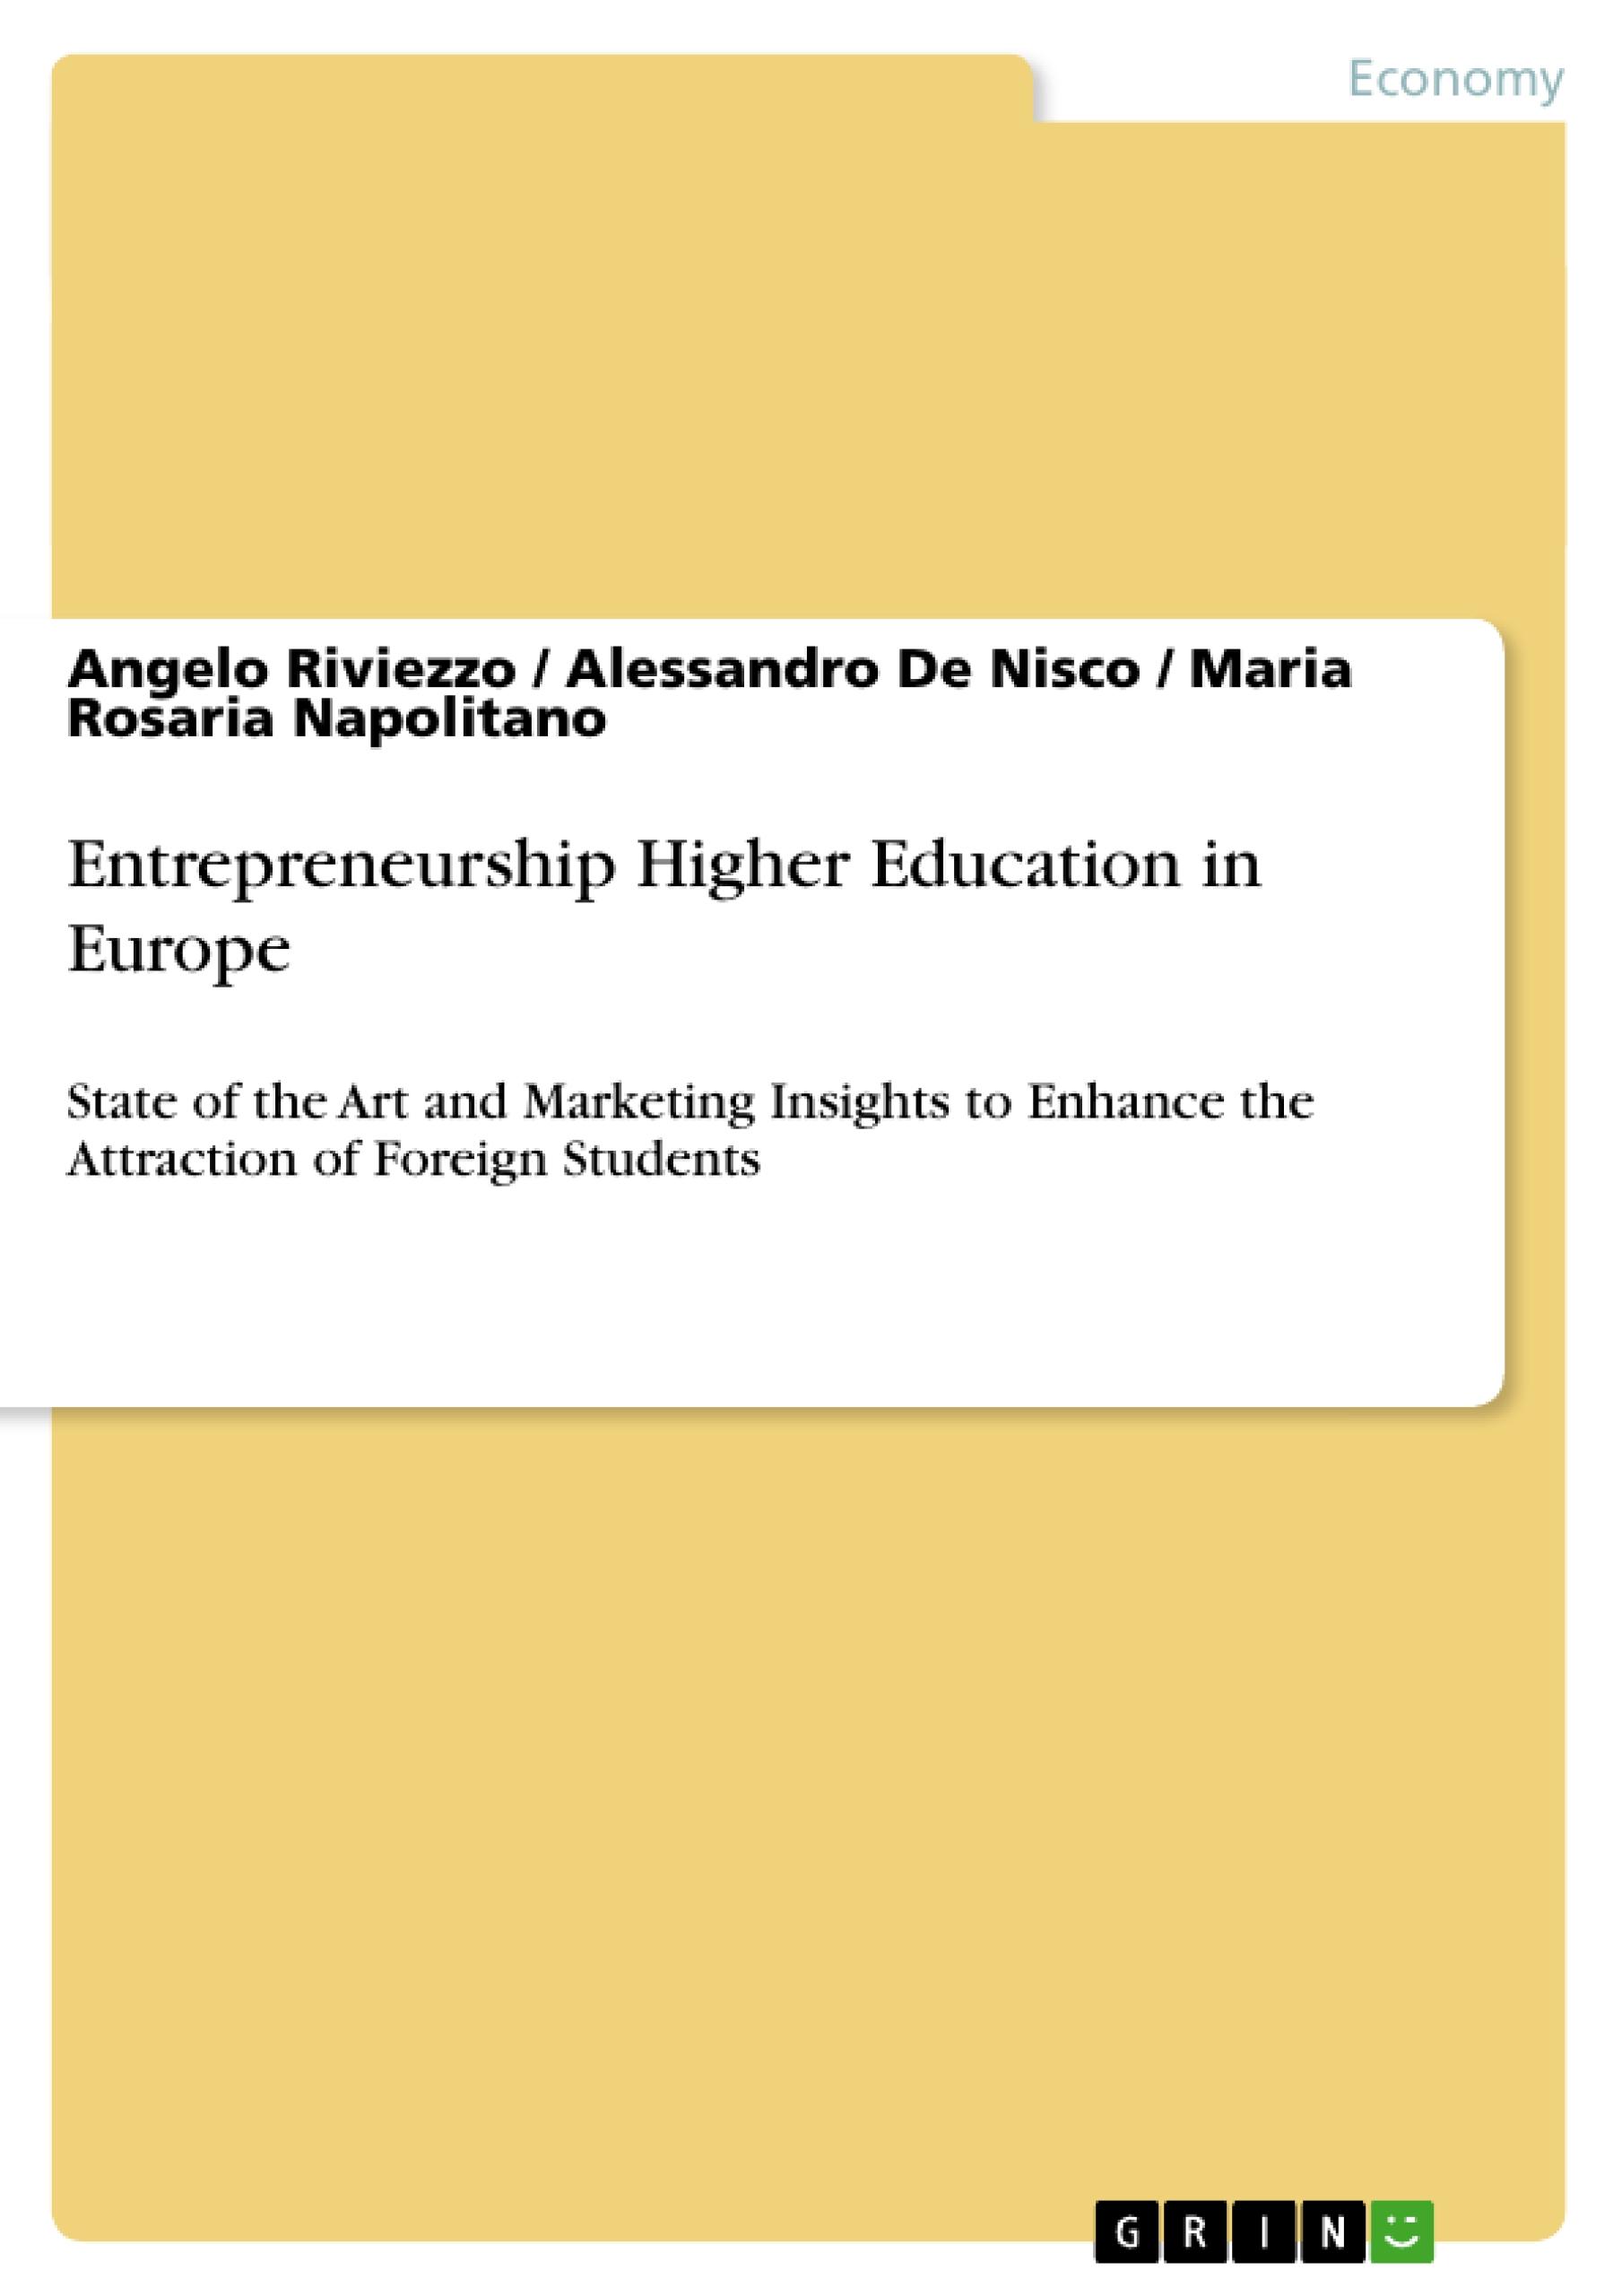 Entrepreneurship Higher Education in Europe | State of the Art and Marketing Insights to Enhance the Attraction of Foreign Students | Angelo Riviezzo (u. a.) | Taschenbuch | Paperback | Englisch - Riviezzo, Angelo